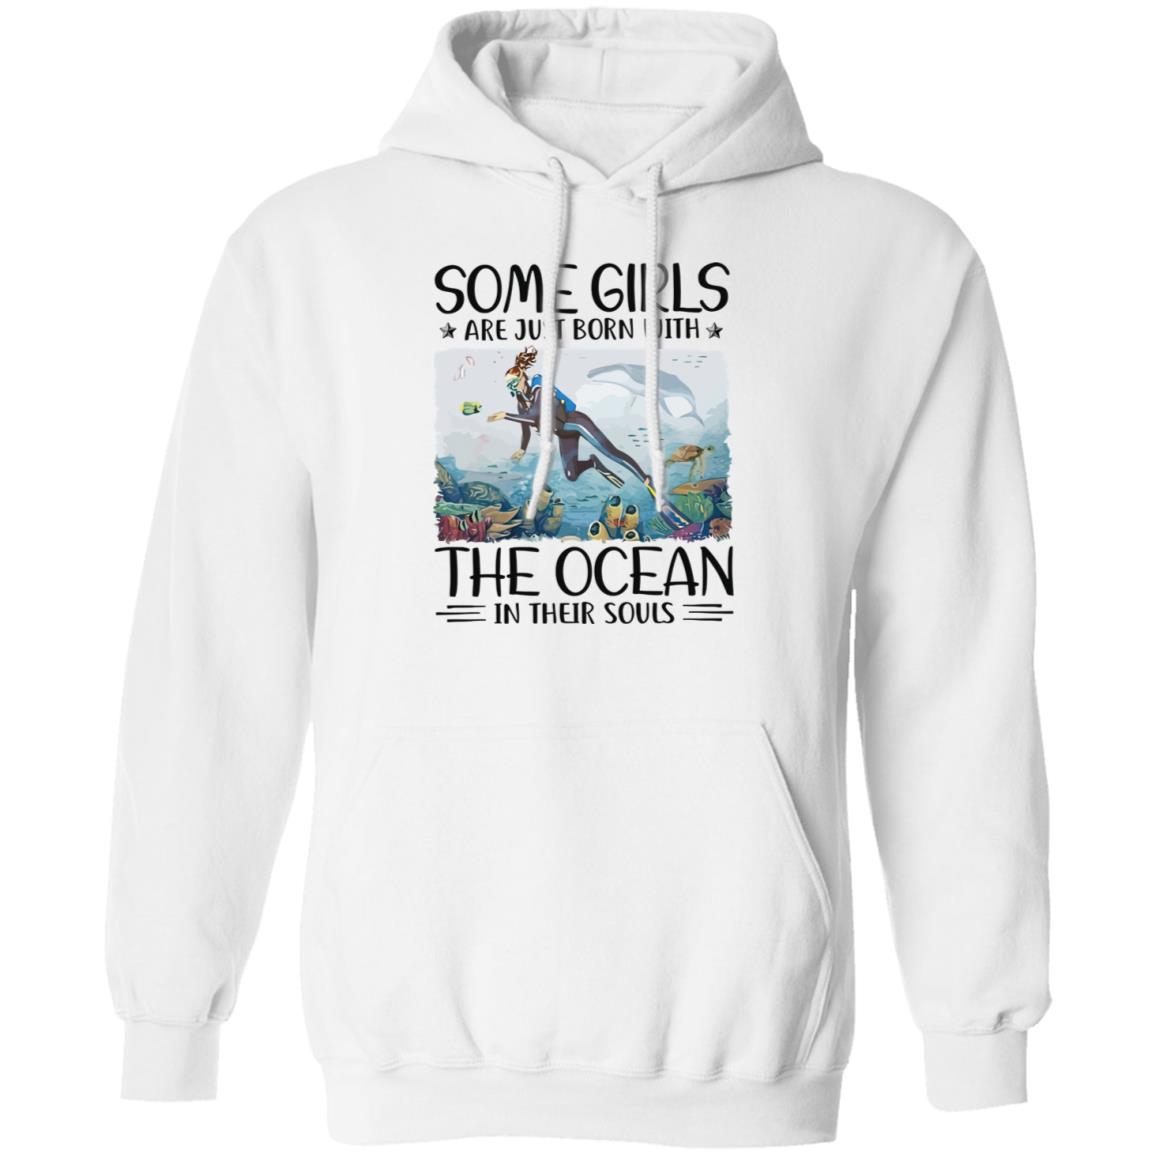 Some Girls Are Just Born With The Ocean In Their Souls Shirt 2